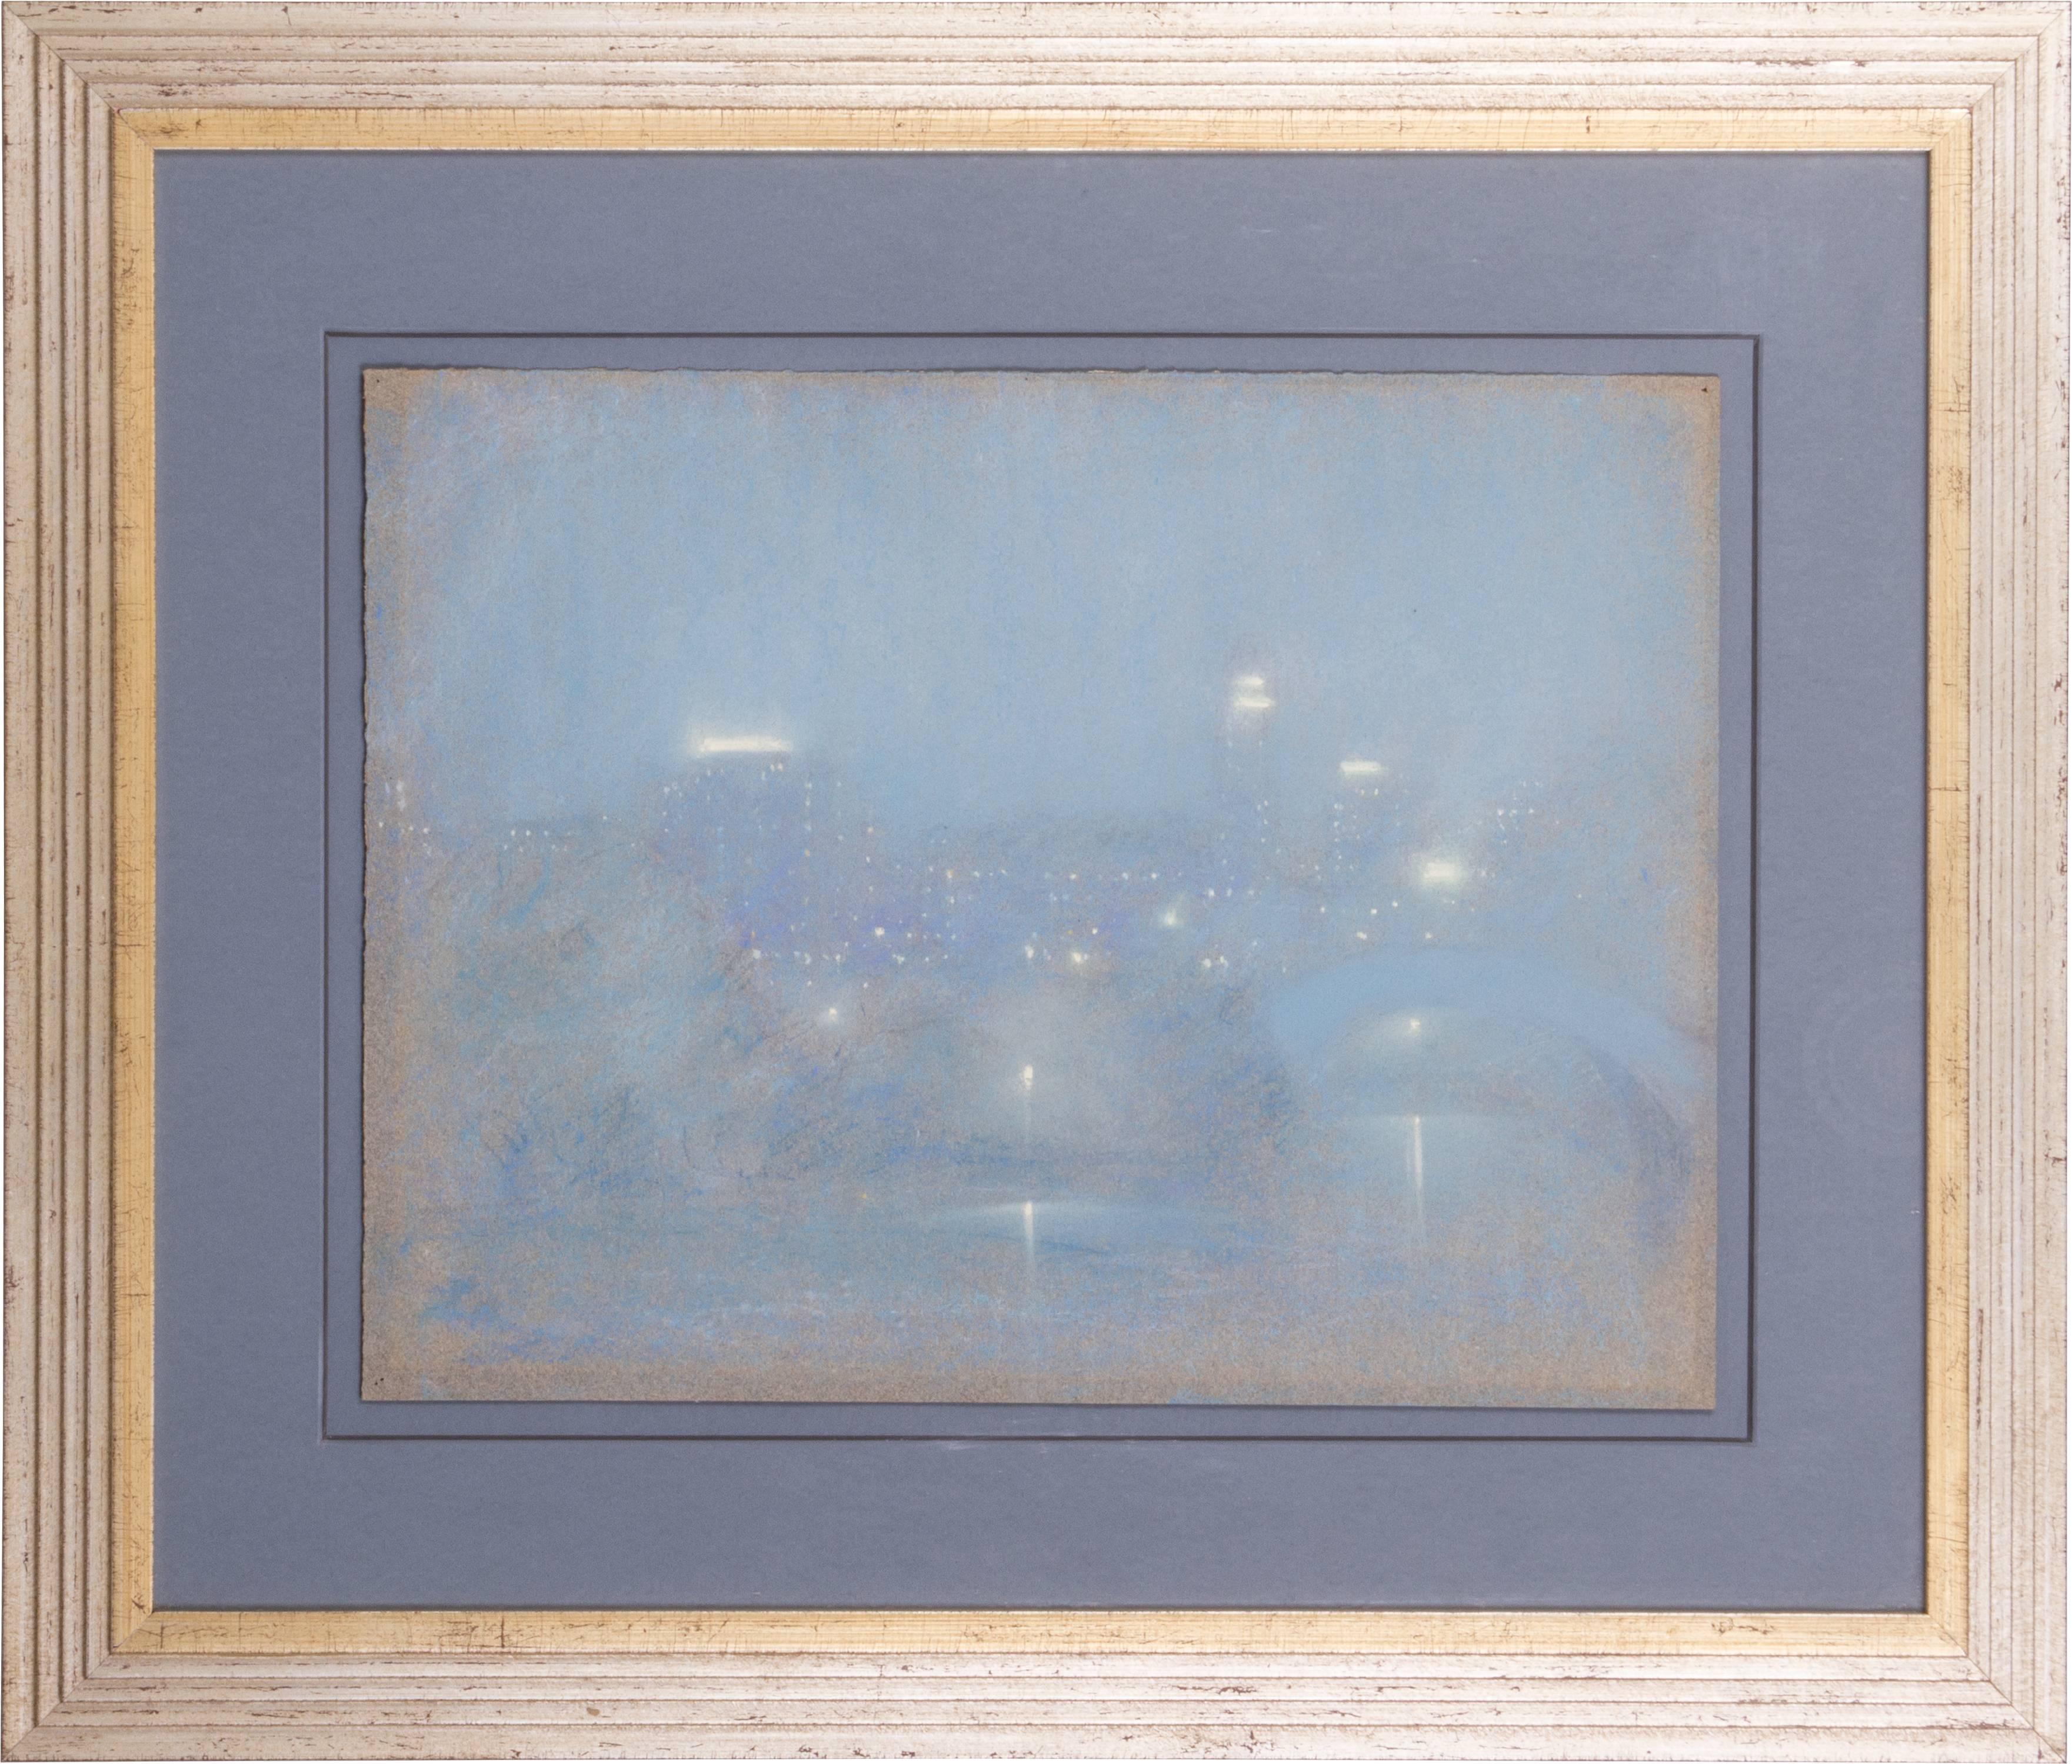 This is a typical of Berthelsen's moody New York cityscapes fog filled with muted city lights.